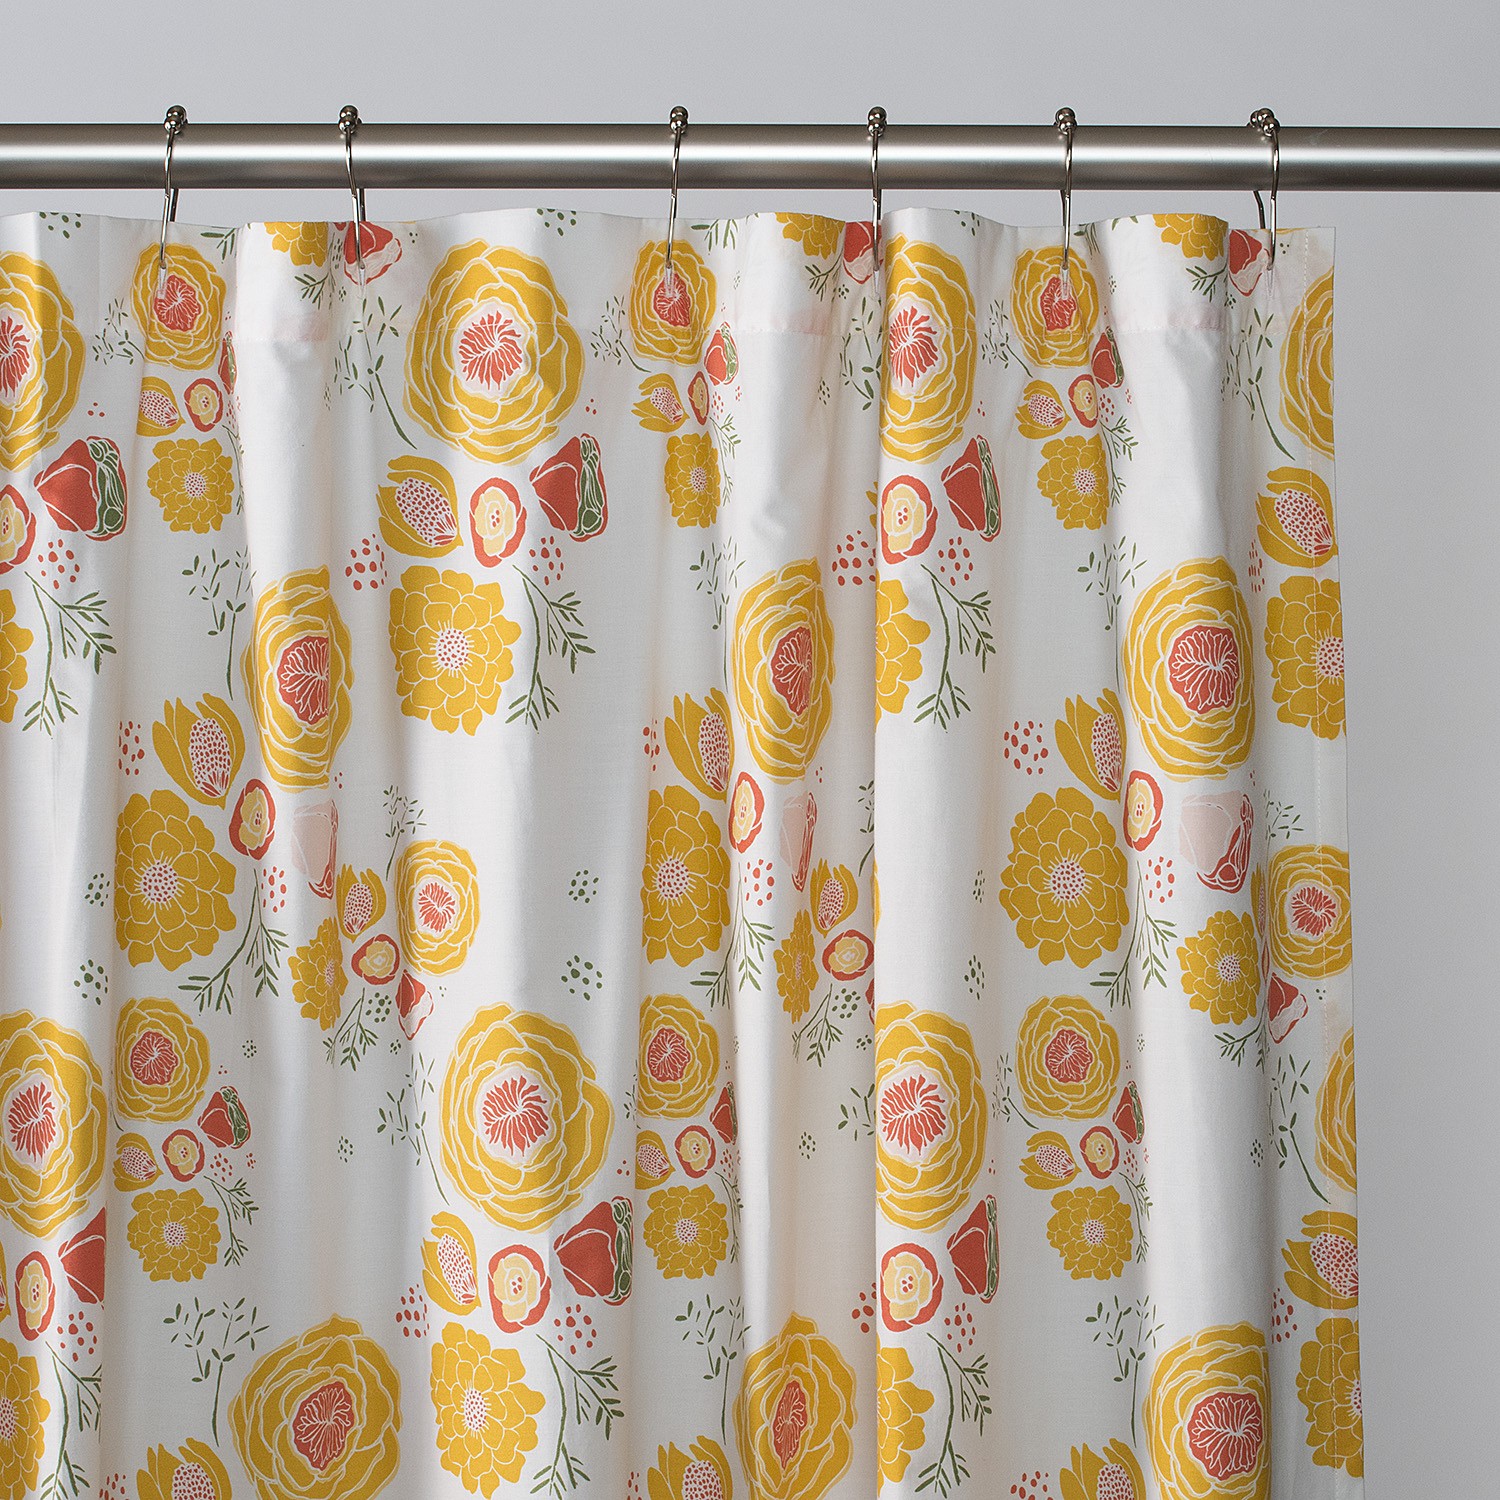 Fl Shower Curtain Special P Club, Electric Shower Curtain